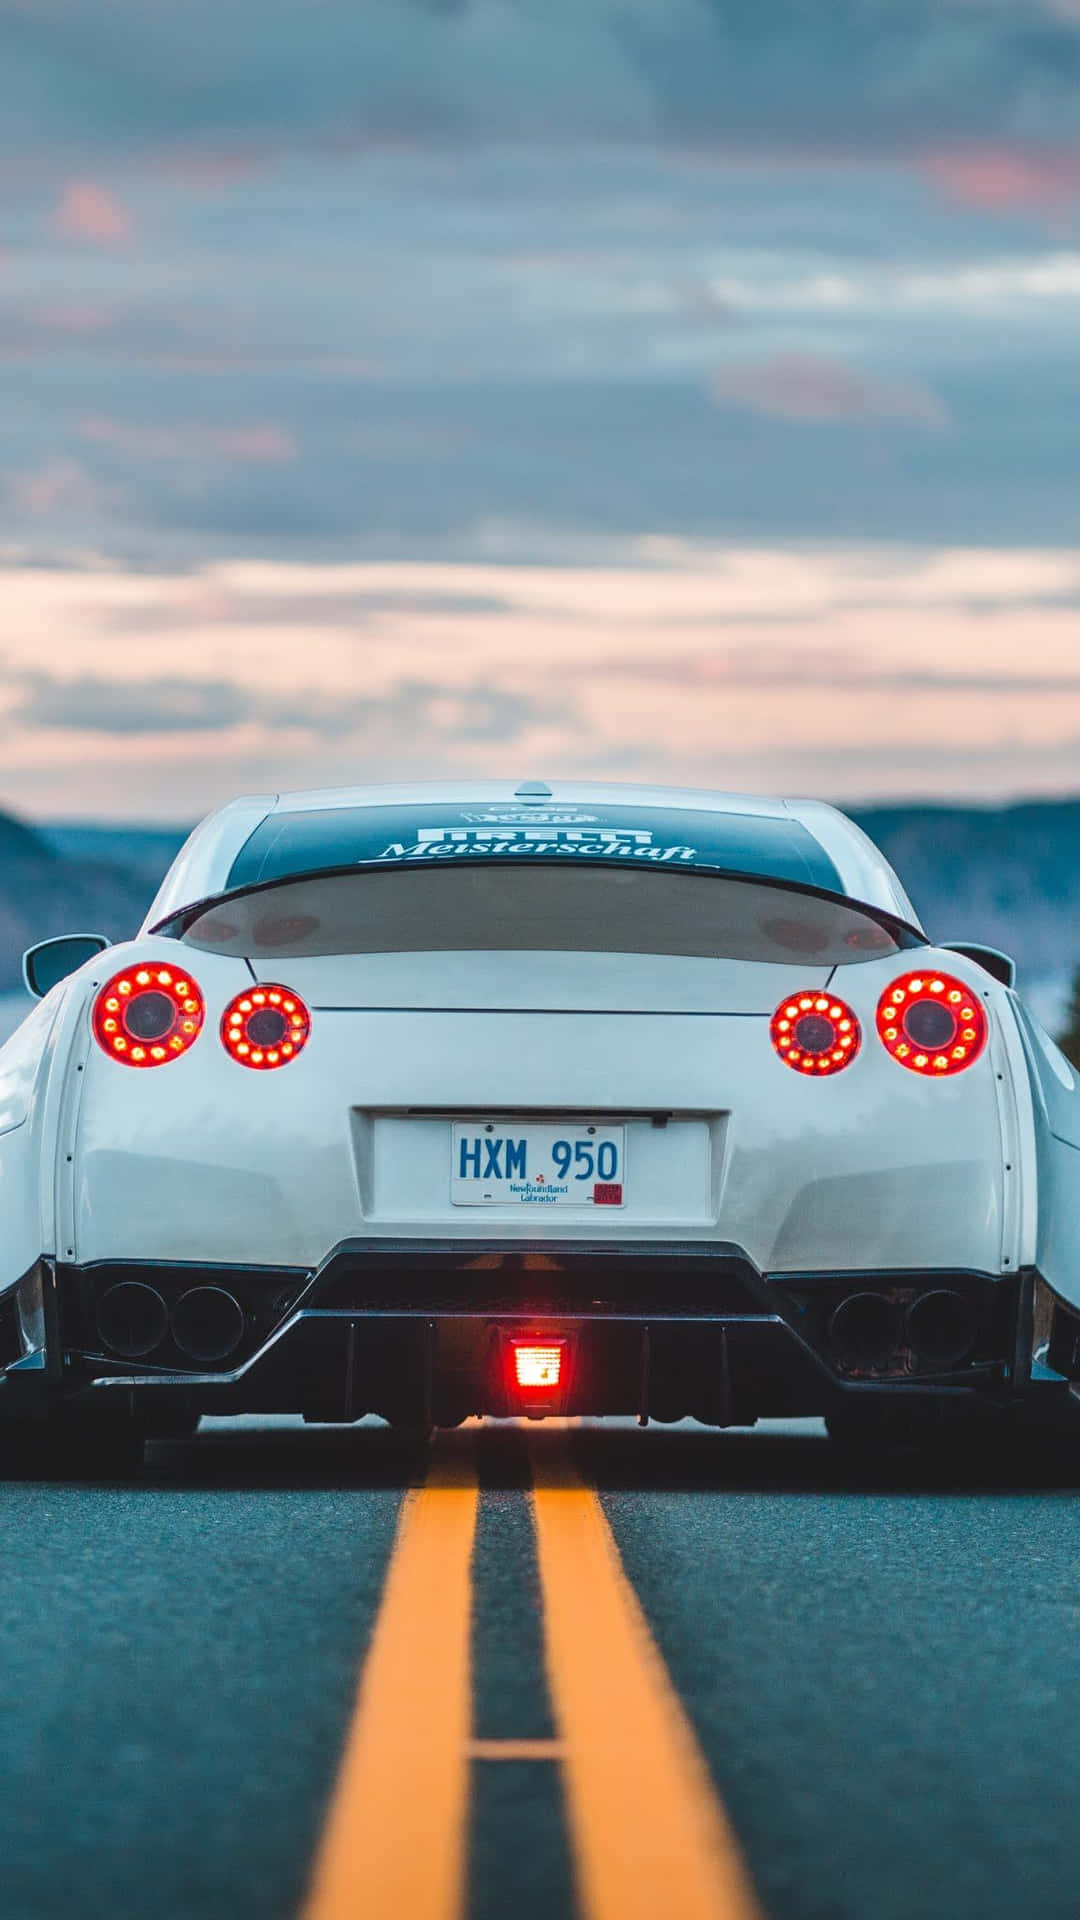 Nissan GTR On Street IPhone Wallpaper  IPhone Wallpapers  iPhone  Wallpapers  Luxury cars Nissan gtr wallpapers Tuner cars